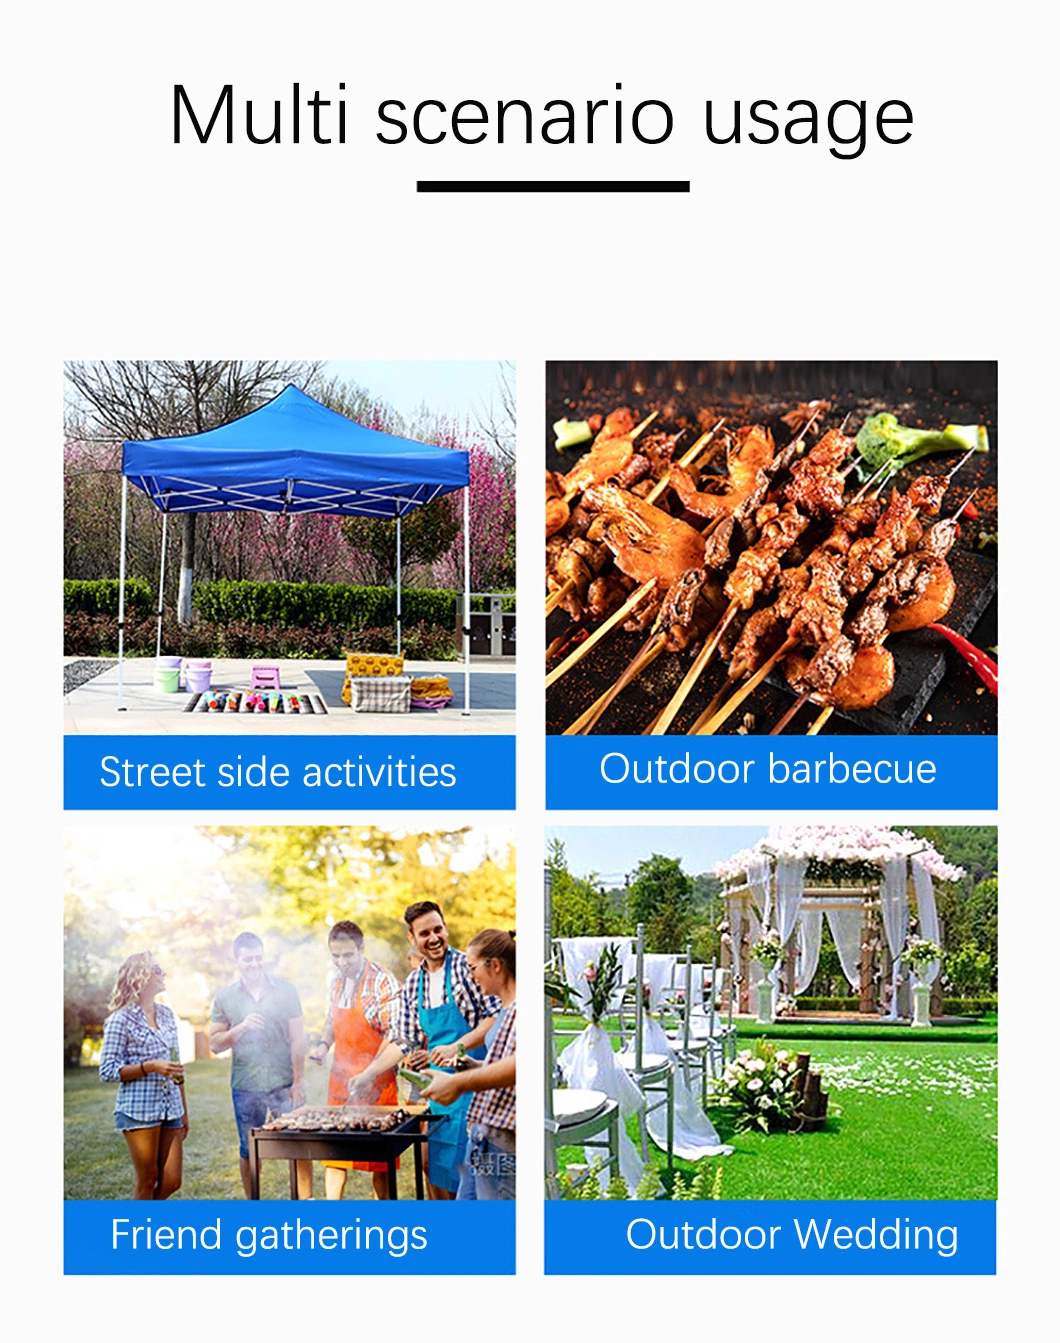 Custom Portable Large Heavy Duty Aluminum/Iron Frame Gazebo Pop up Canopy Tent Outdoor Trade Show Beach Party Events Advertising